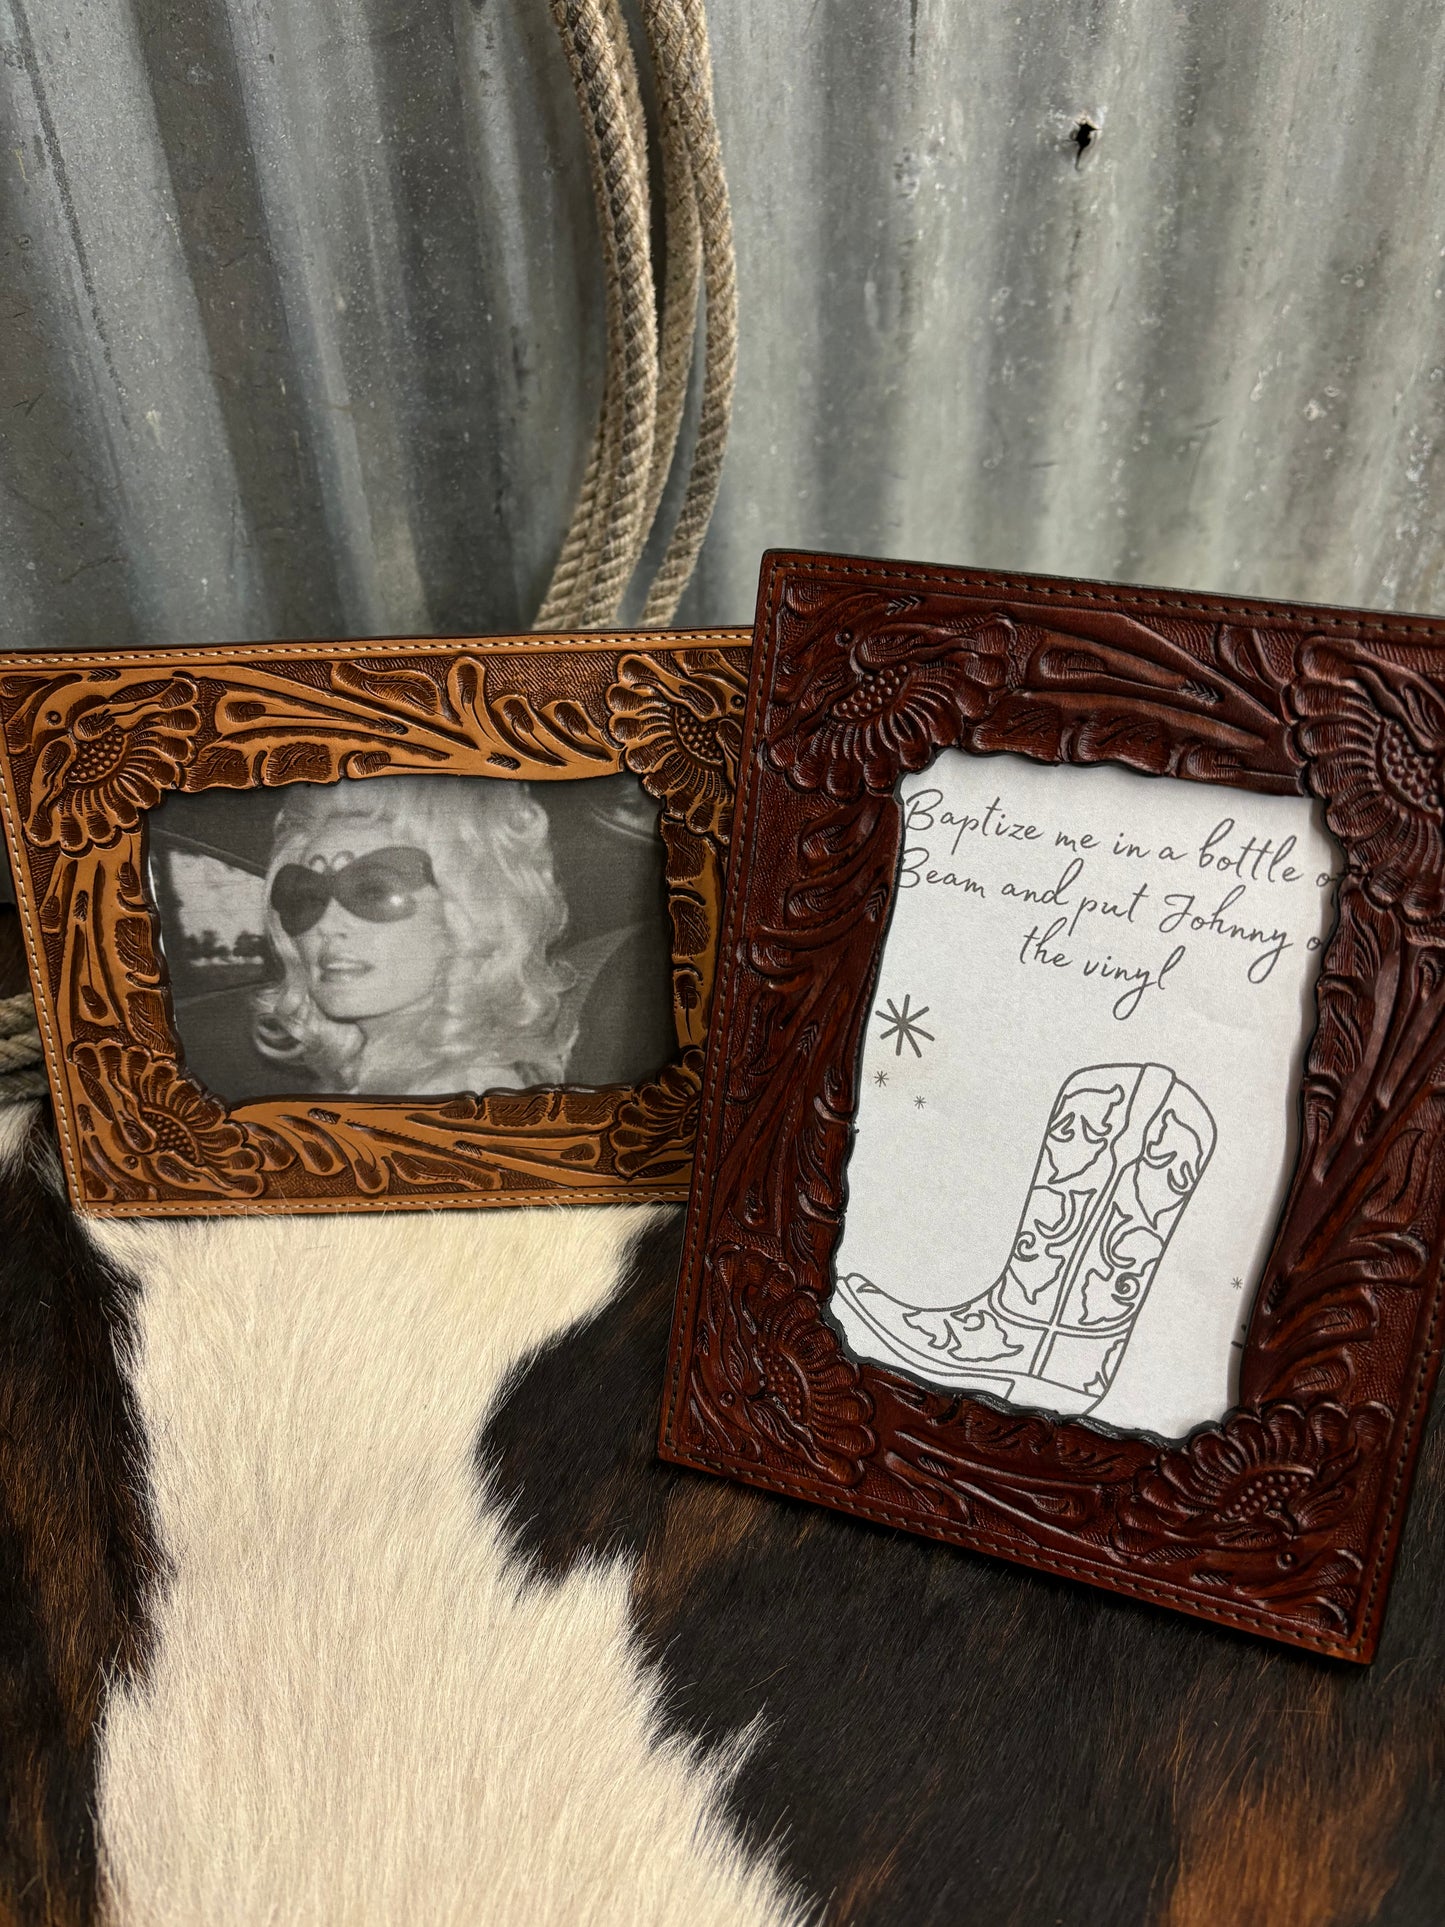 The Tooled Leather Natural Medium Frame